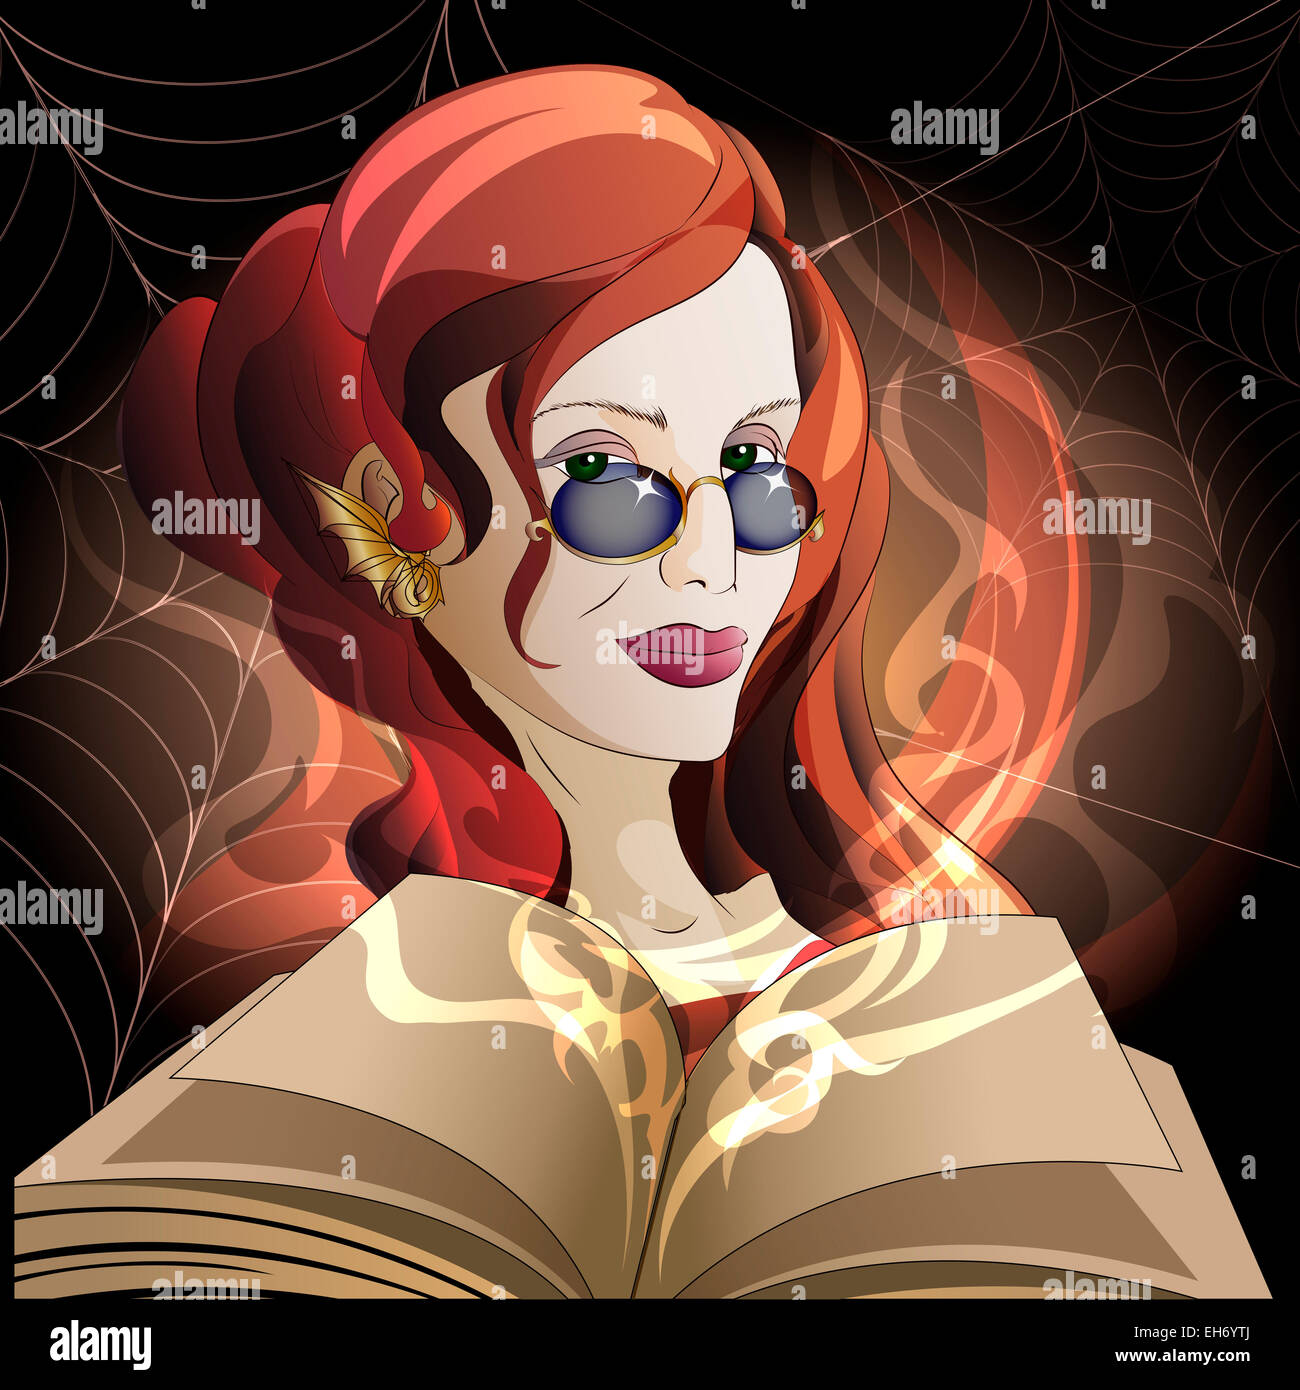 Illustration of  the witch with open book of spells and inflaming magic fire against spider webs drawn in cartoon style Stock Photo